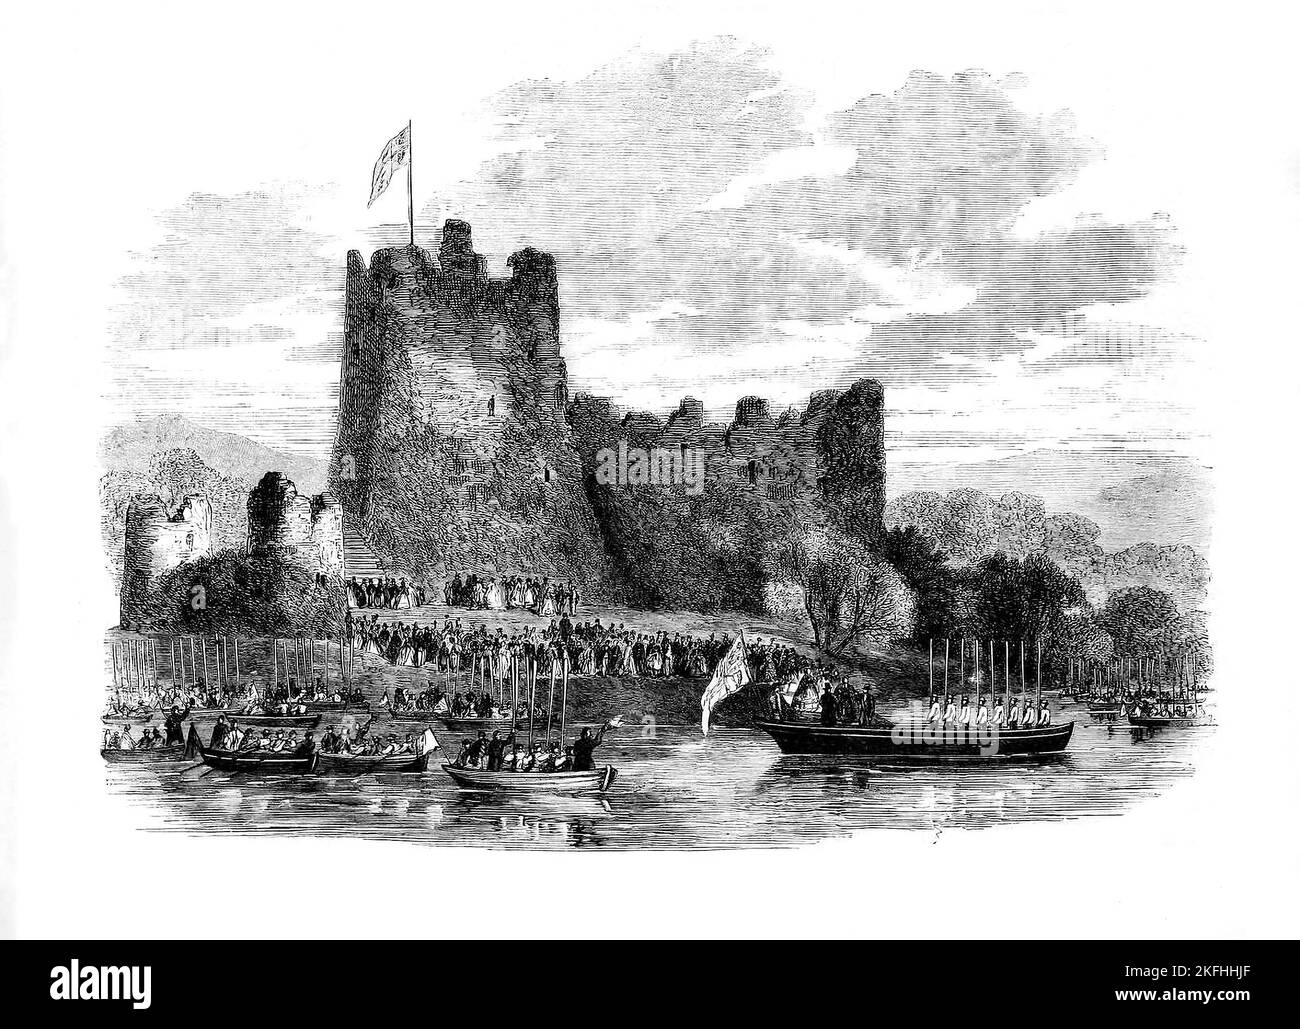 Queen Victoria at 15th century Ross Castle on the shores of Lough Leane in the (now) Killarney National Park, County Kerry, Ireland.  The visit in 1861 was her  visit to the location. Stock Photo